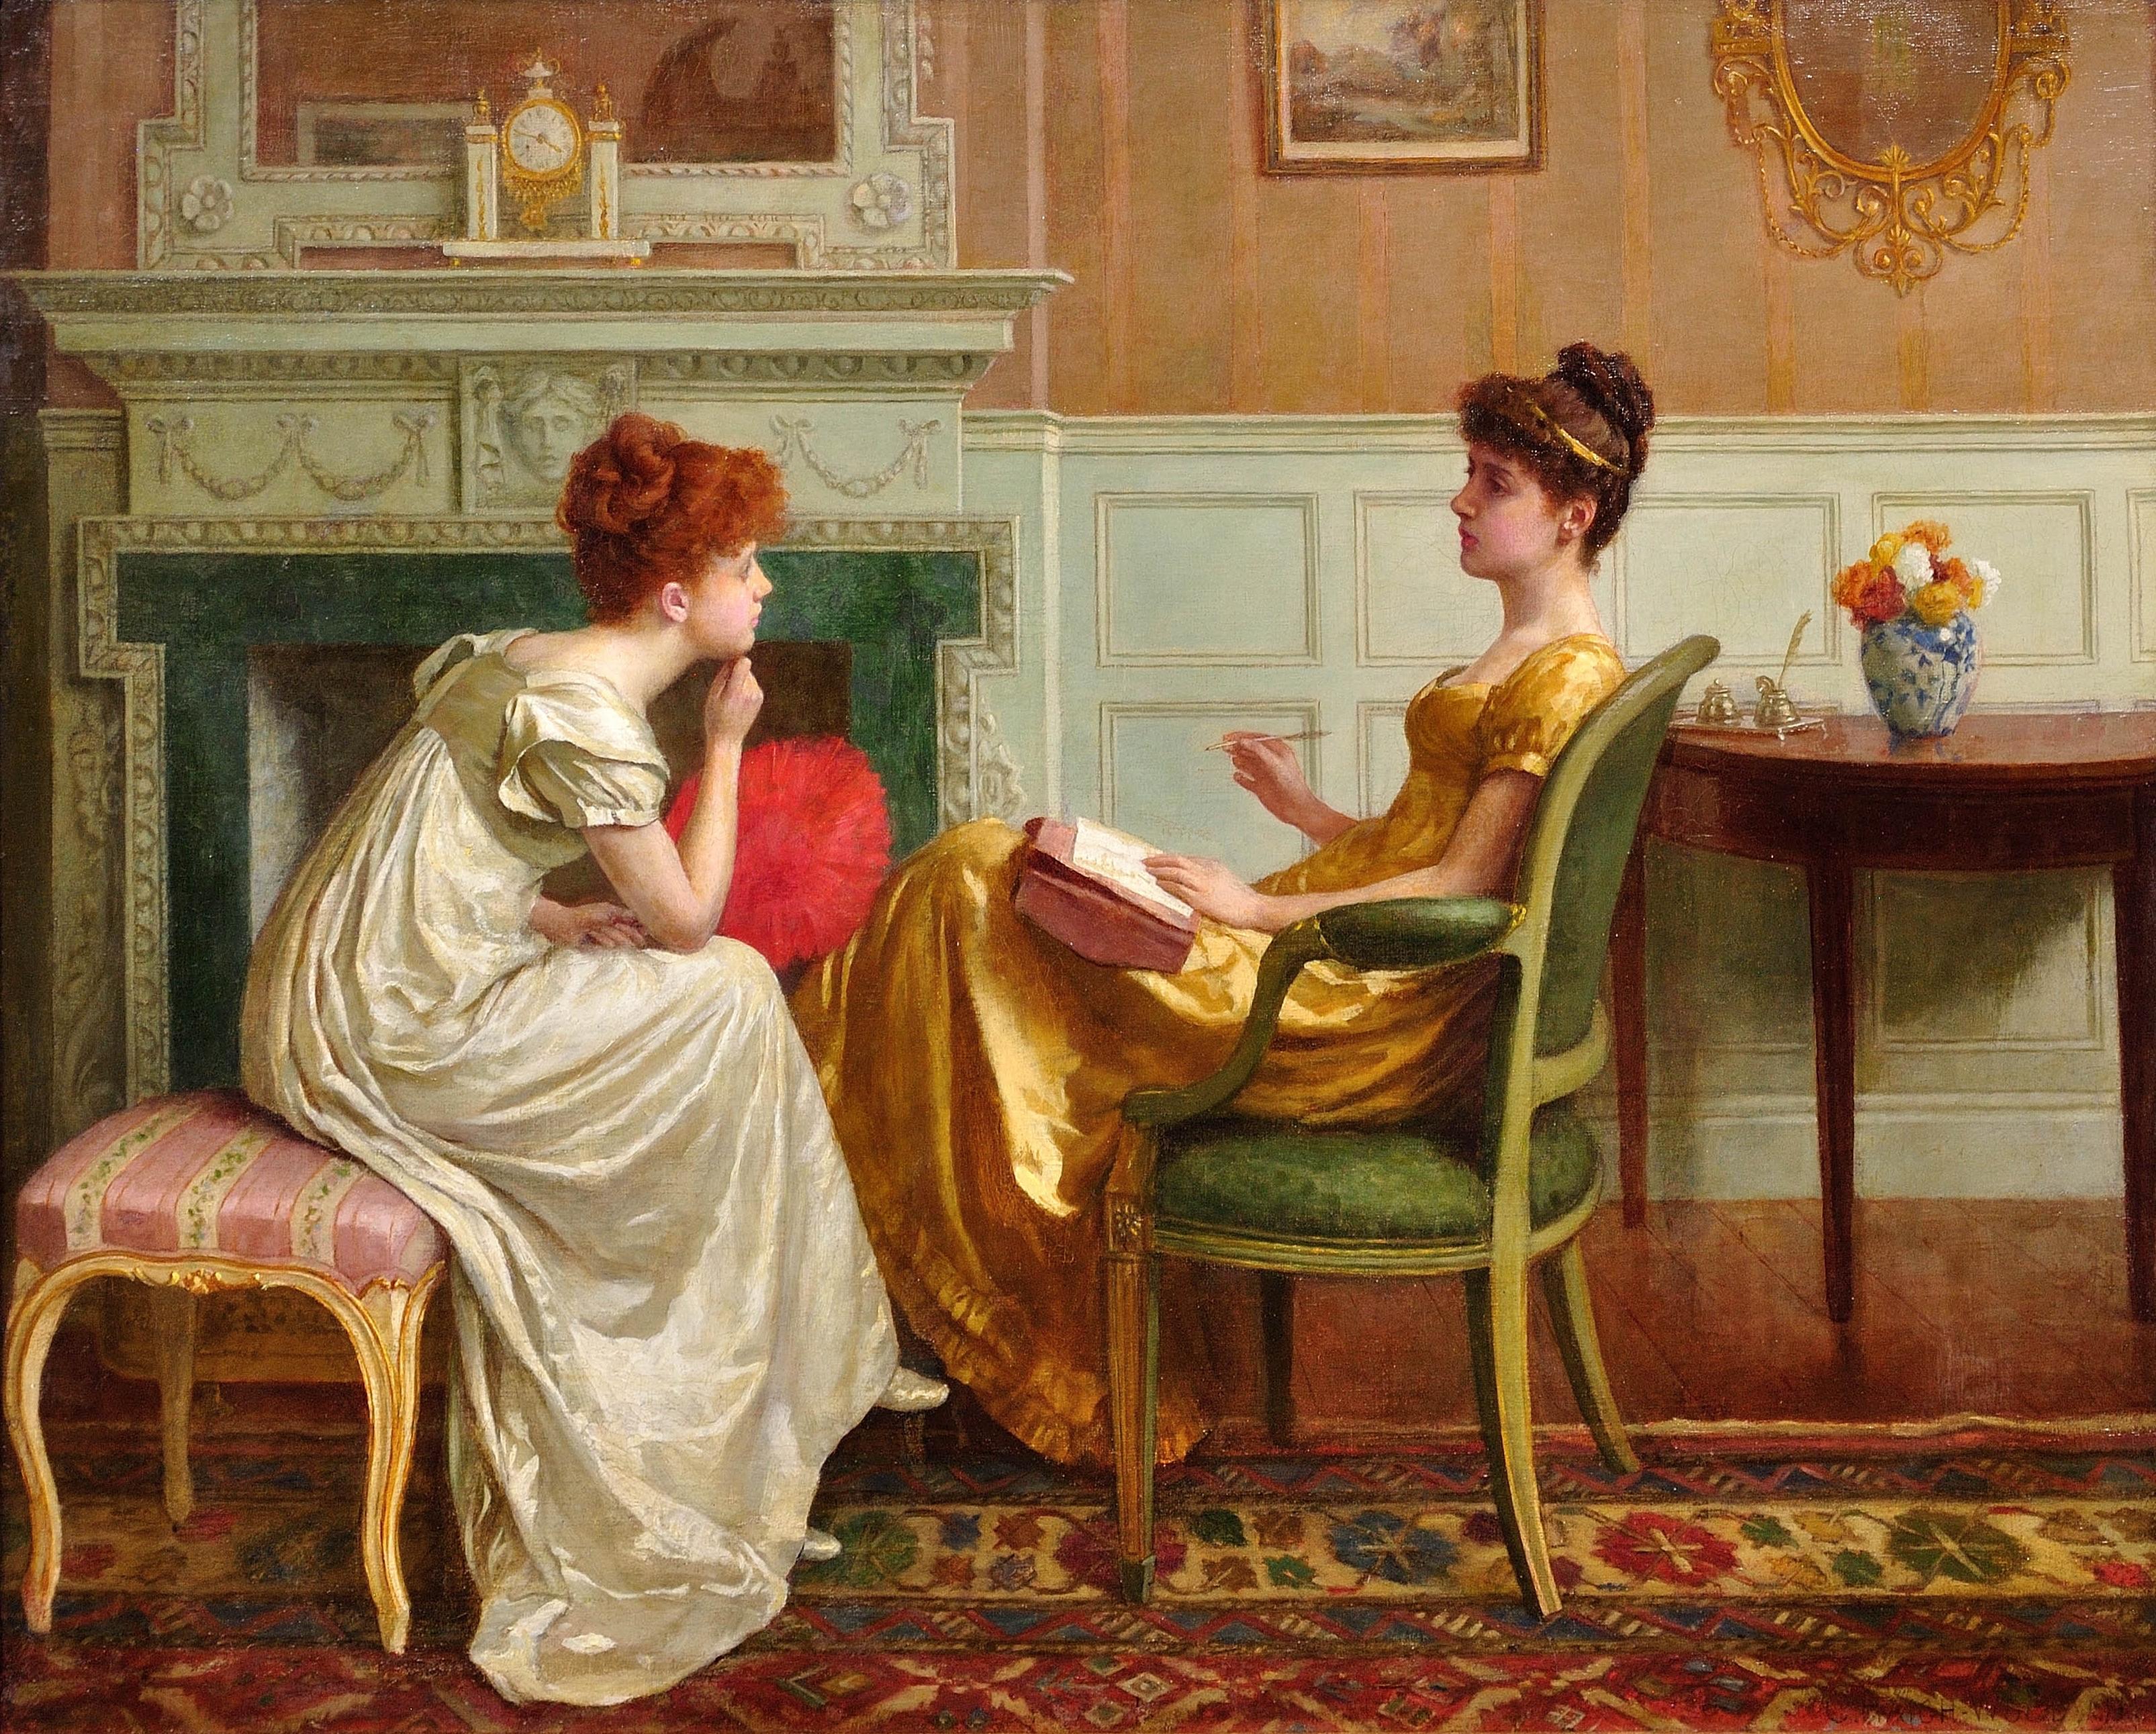 How long will it take him to propose to me? 1891. Victorian England Parlor Scene - Painting by Charles Haigh-Wood